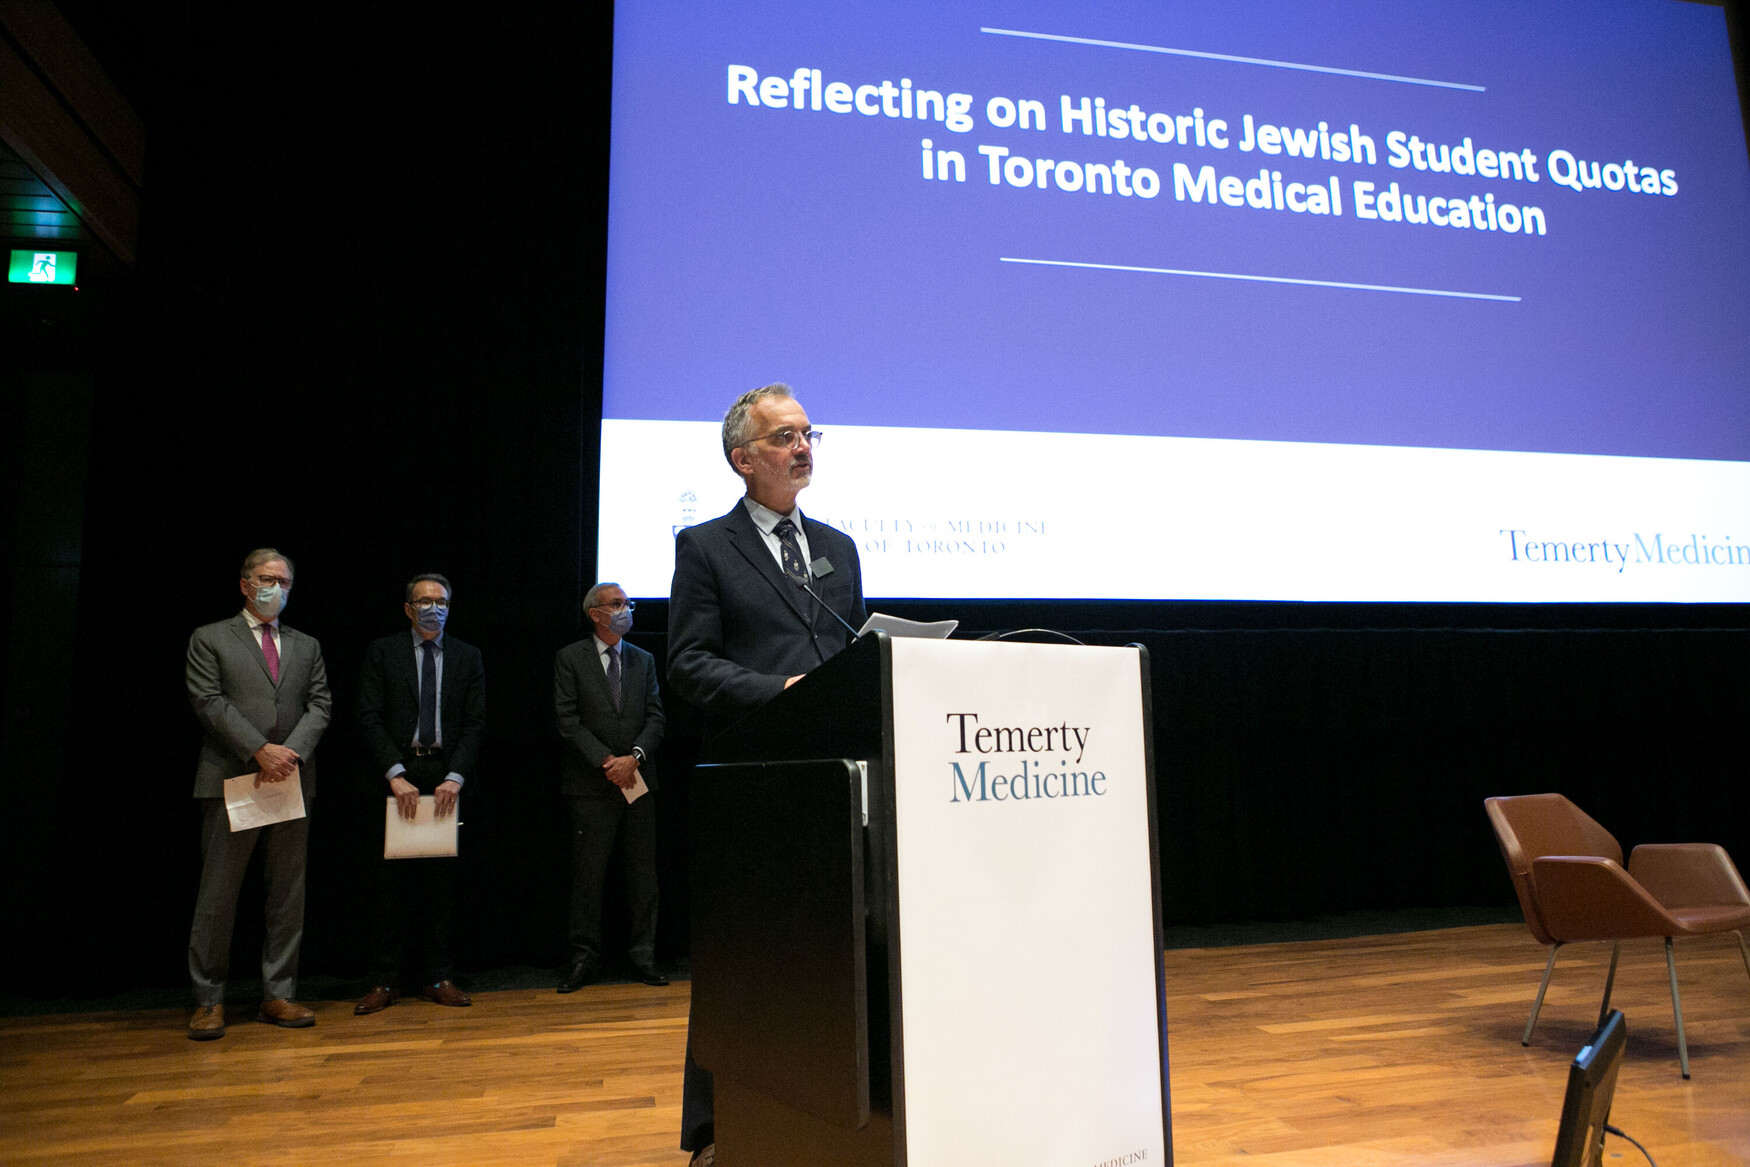 Temerty Medicine Dean Trevor Young speaks at a podium in front of a screen that says, "Reflecting on Historic Jewish Student Quotas in Toronto Medical Education".